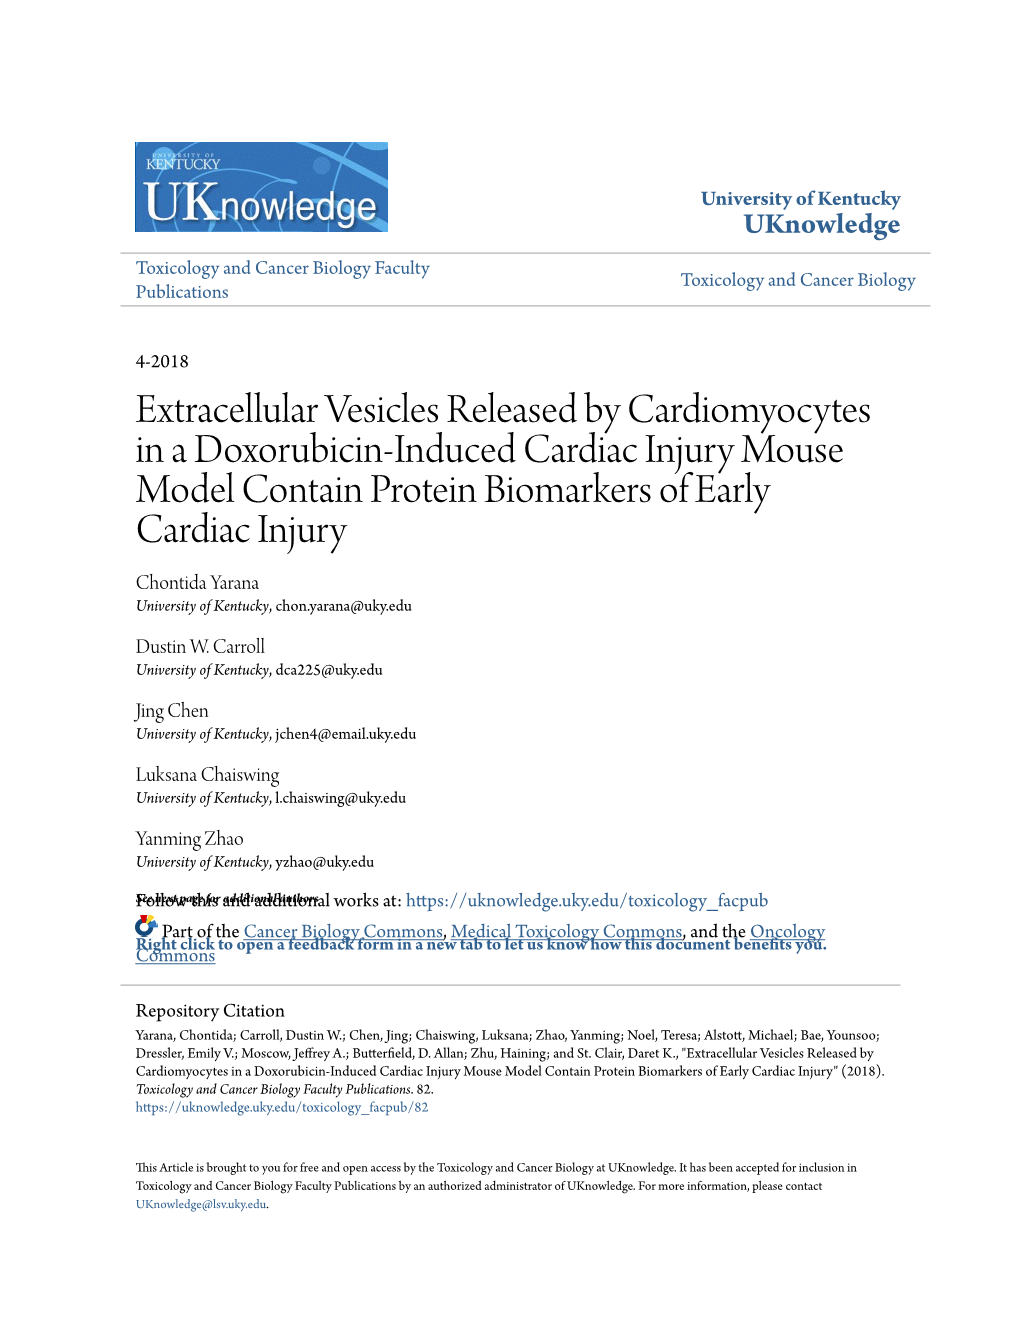 Extracellular Vesicles Released by Cardiomyocytes in a Doxorubicin